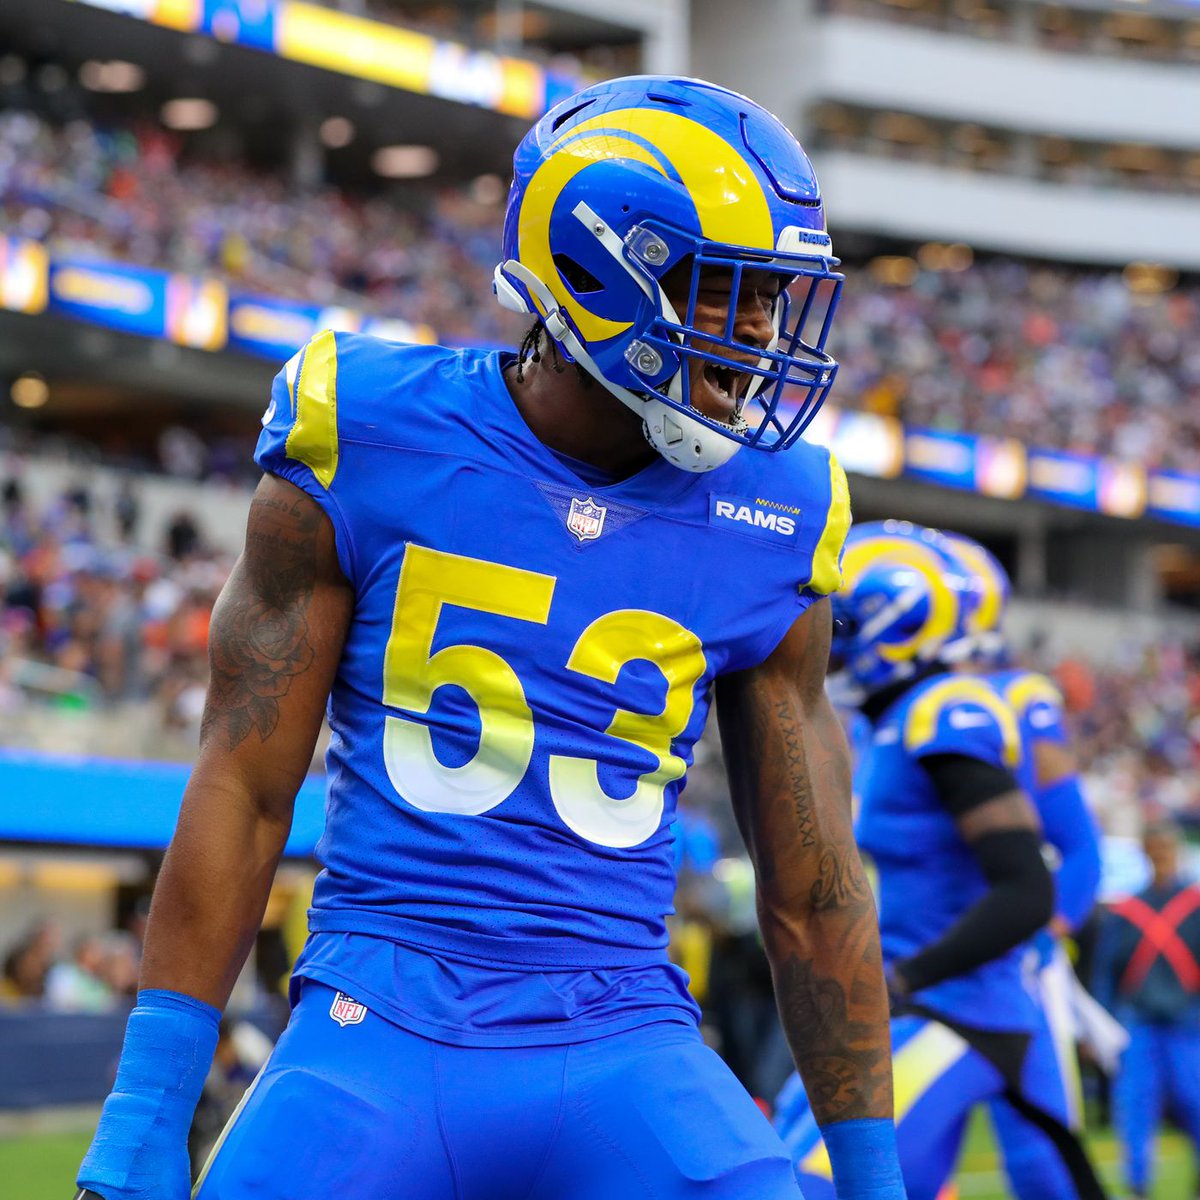 Finishing up the Rams' defense and boy, LB Ernest Jones is a baller! We need to talk more about him when discussing LBs in today's NFL. Going to have a written piece out in the coming days! #RamsHouse